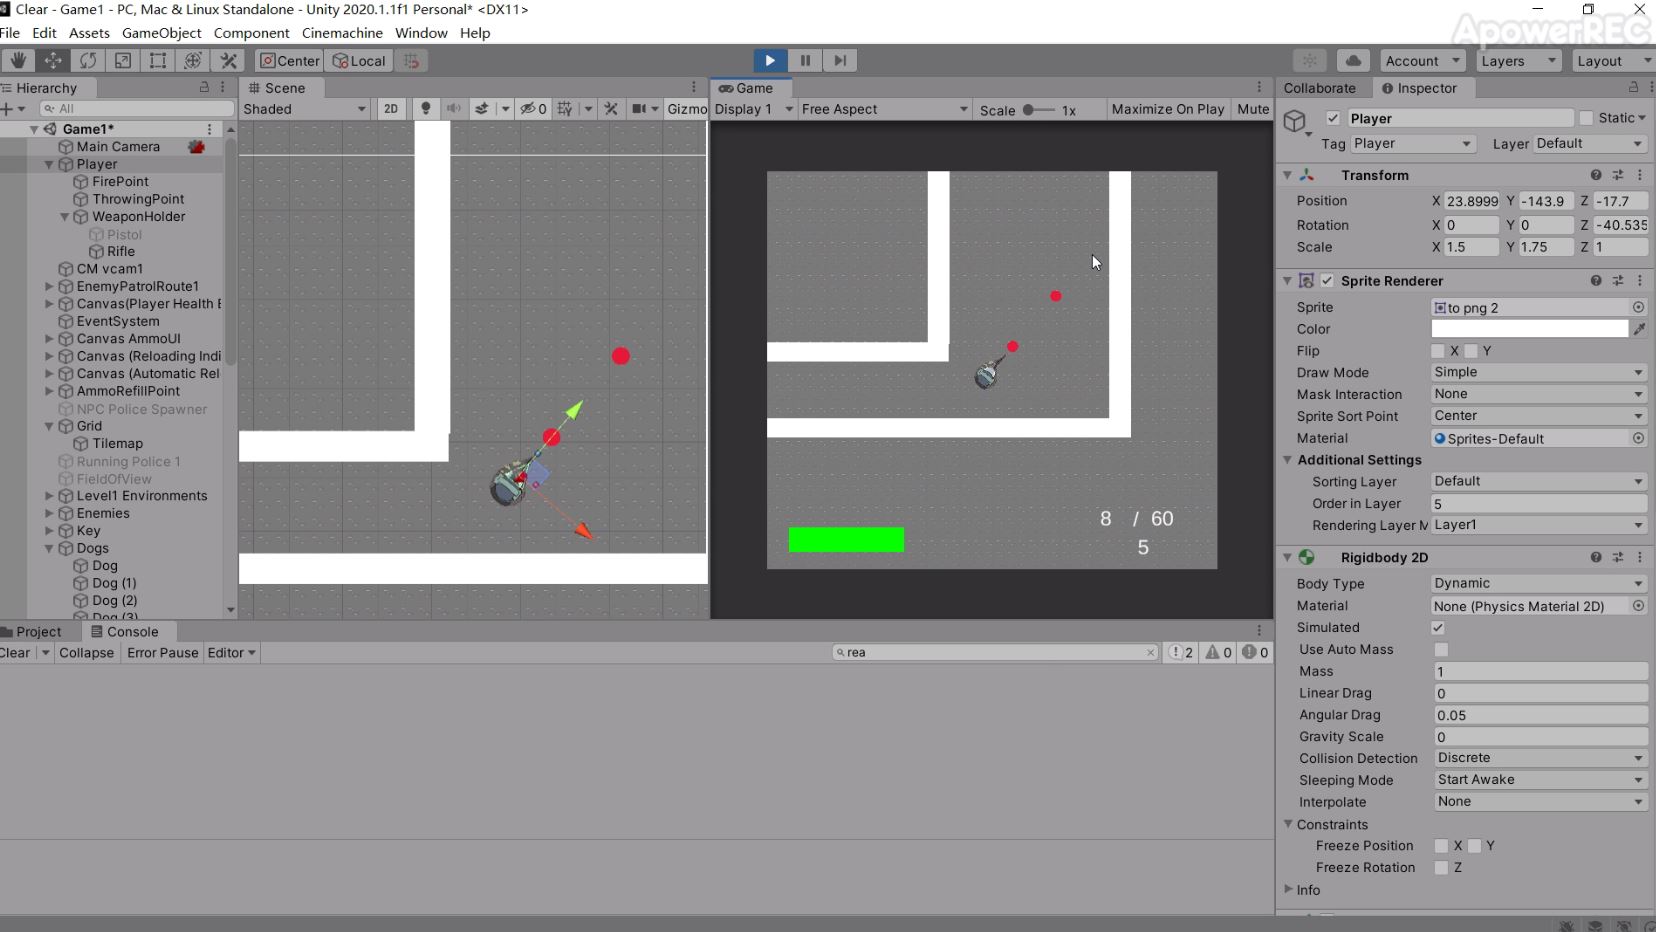 Hello! I've been working on a top down shooter game recently and I've run into a weird issue. So I used a vector2 variable to calculate the direction my character should look at (mouse position - rigidbody2d.position), and everything works fine until my character collides with something. After the collision, there's an offset between my mouse position and where my character looks at and shoot, as illustrated by the images below. I'm suspecting that it has something to do with rigidbody but I'm not sure how to solve it. Any help is greatly appreciated!